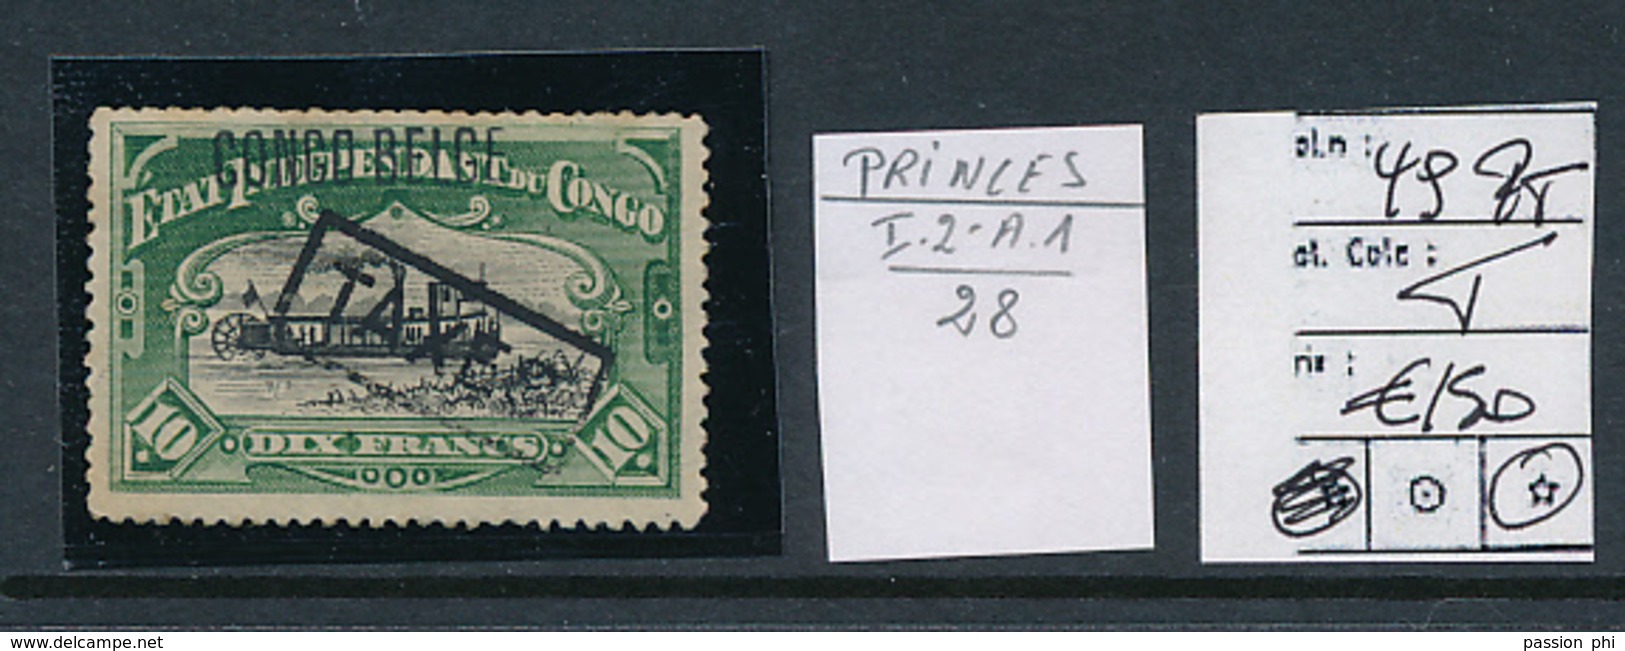 BELGIAN CONGO 1909 ISSUE "PRINCES"  COB 49PT POSITION 28 HANDSTAMPED TAXES LH - Unused Stamps